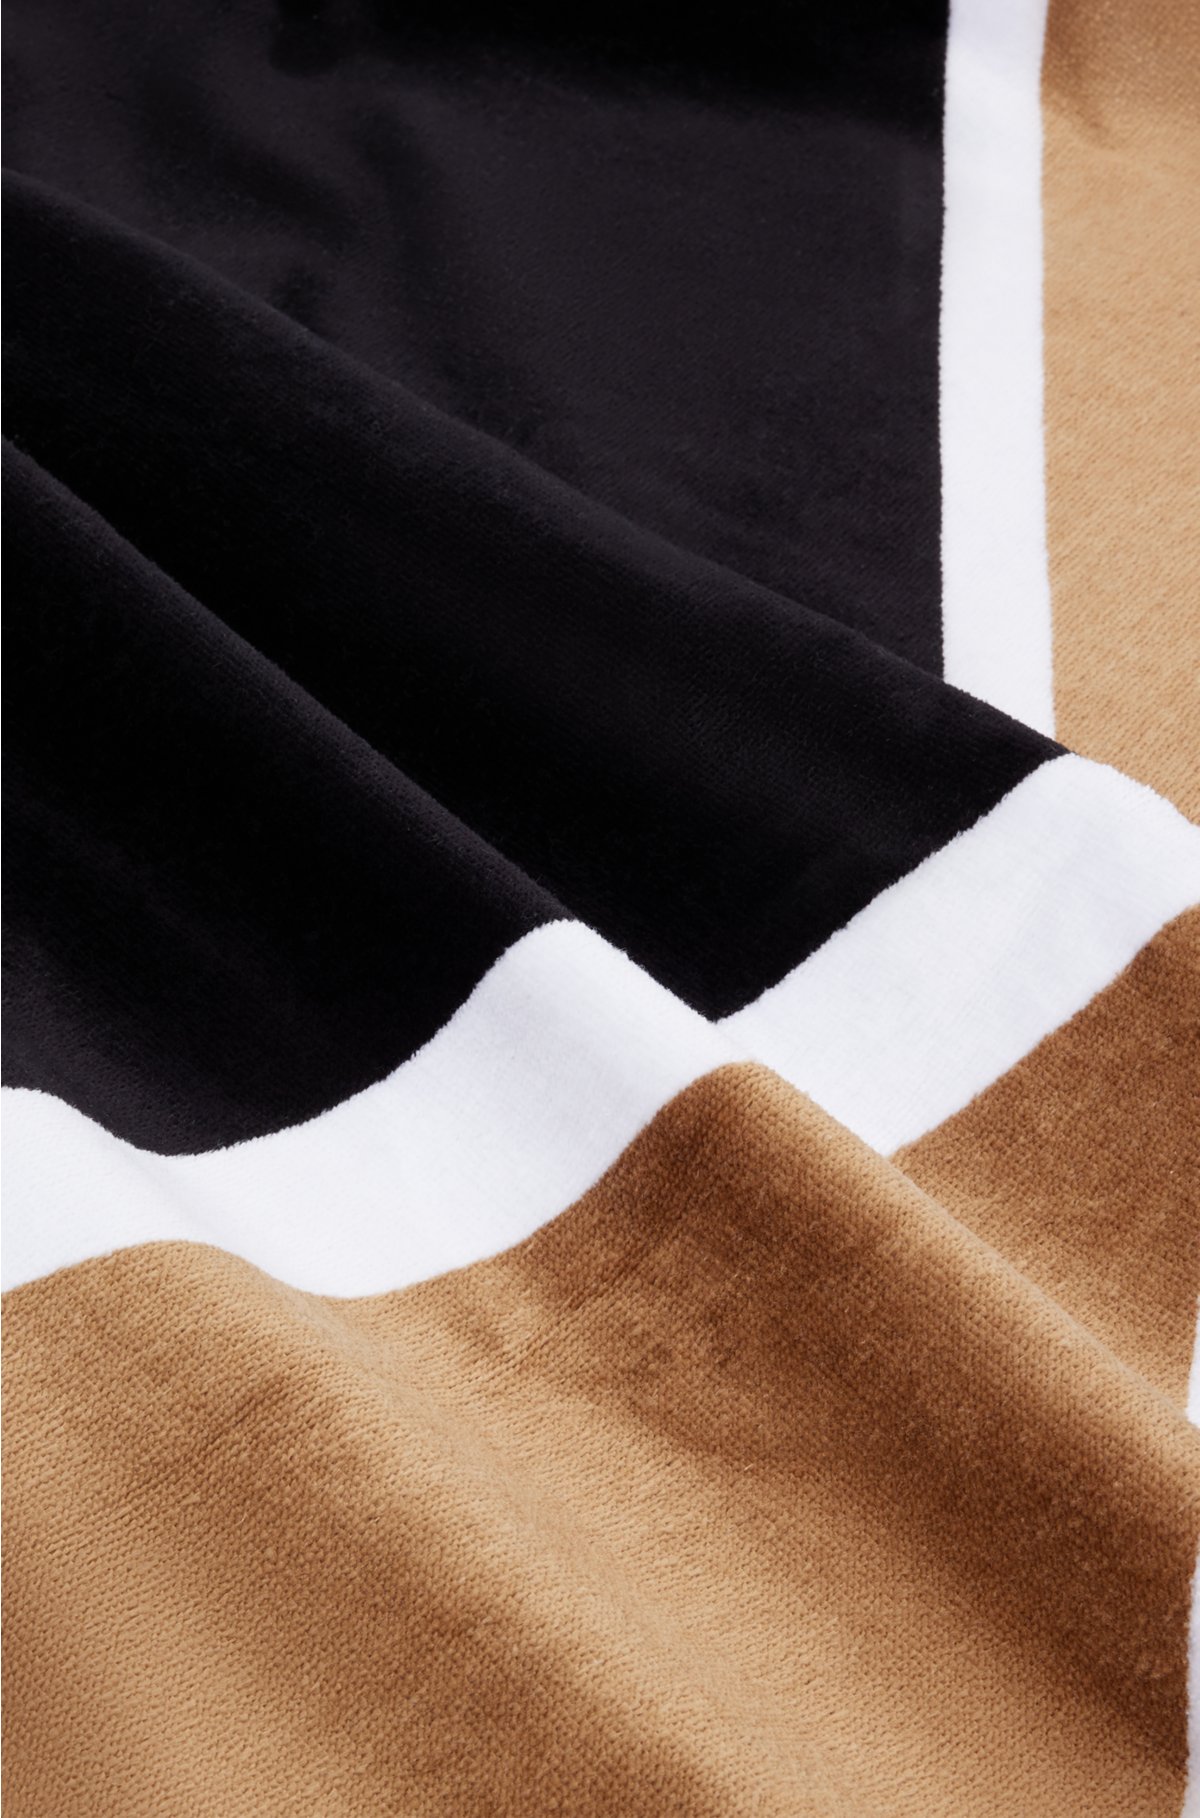 Cotton-velvet beach towel with colour-blocking and branding, Patterned